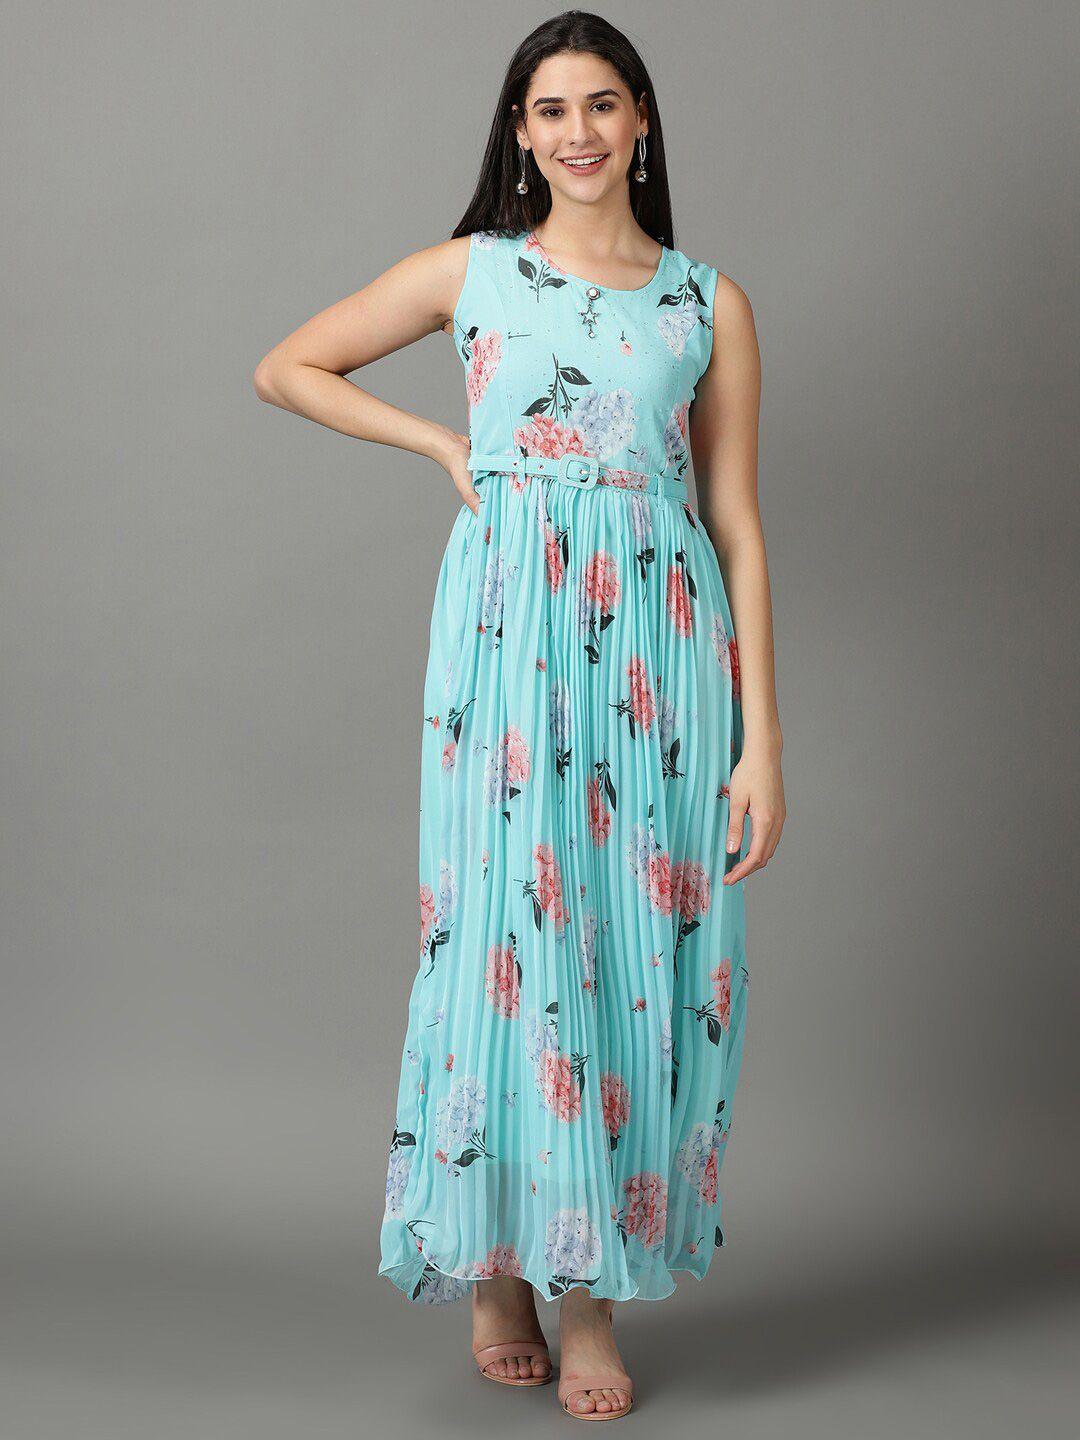 showoff round neck floral printed accordion pleats chiffon maxi dress with belt